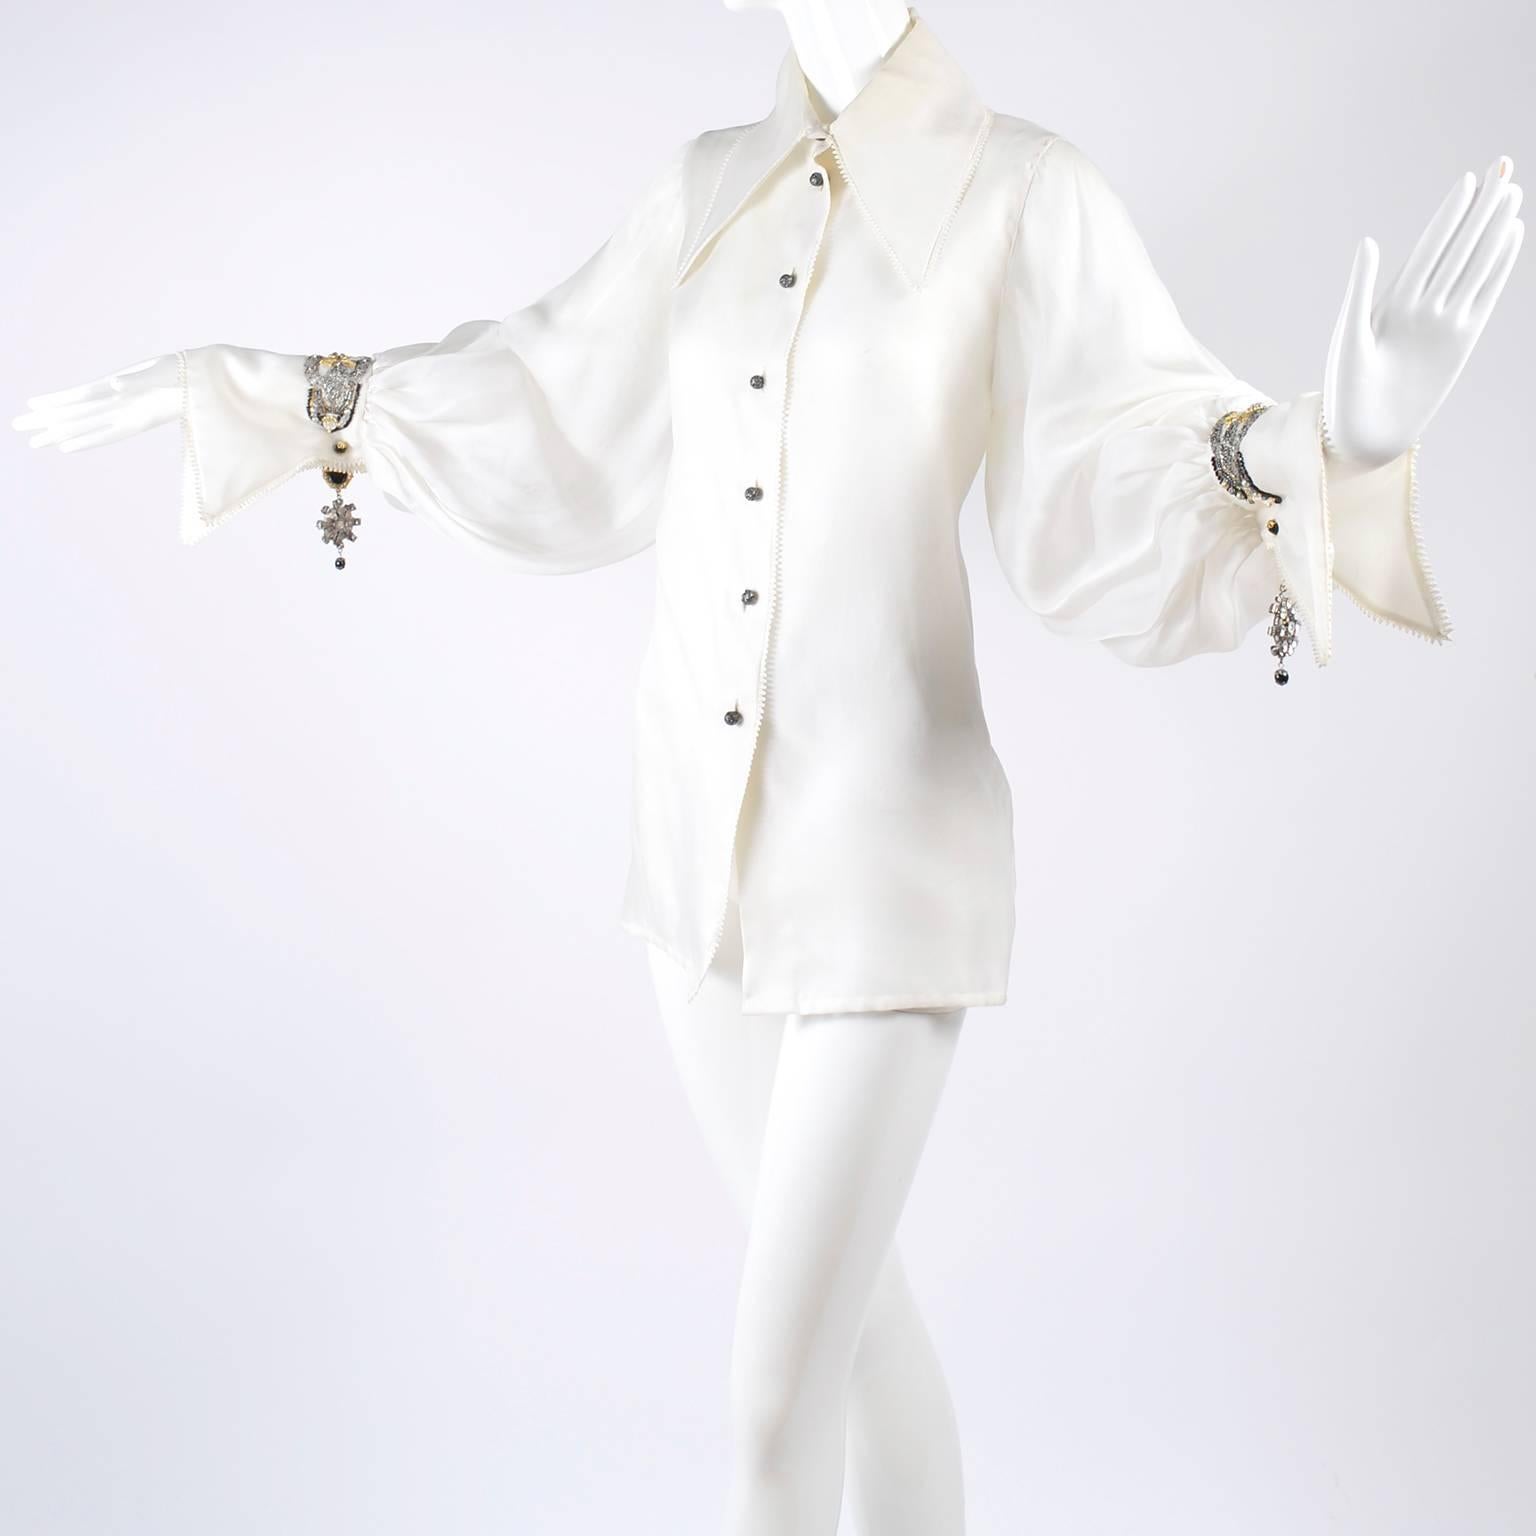 Christian Dior Beaded Silk Organza Numbered Blouse with Jewel Cufflinks, 1980s 9